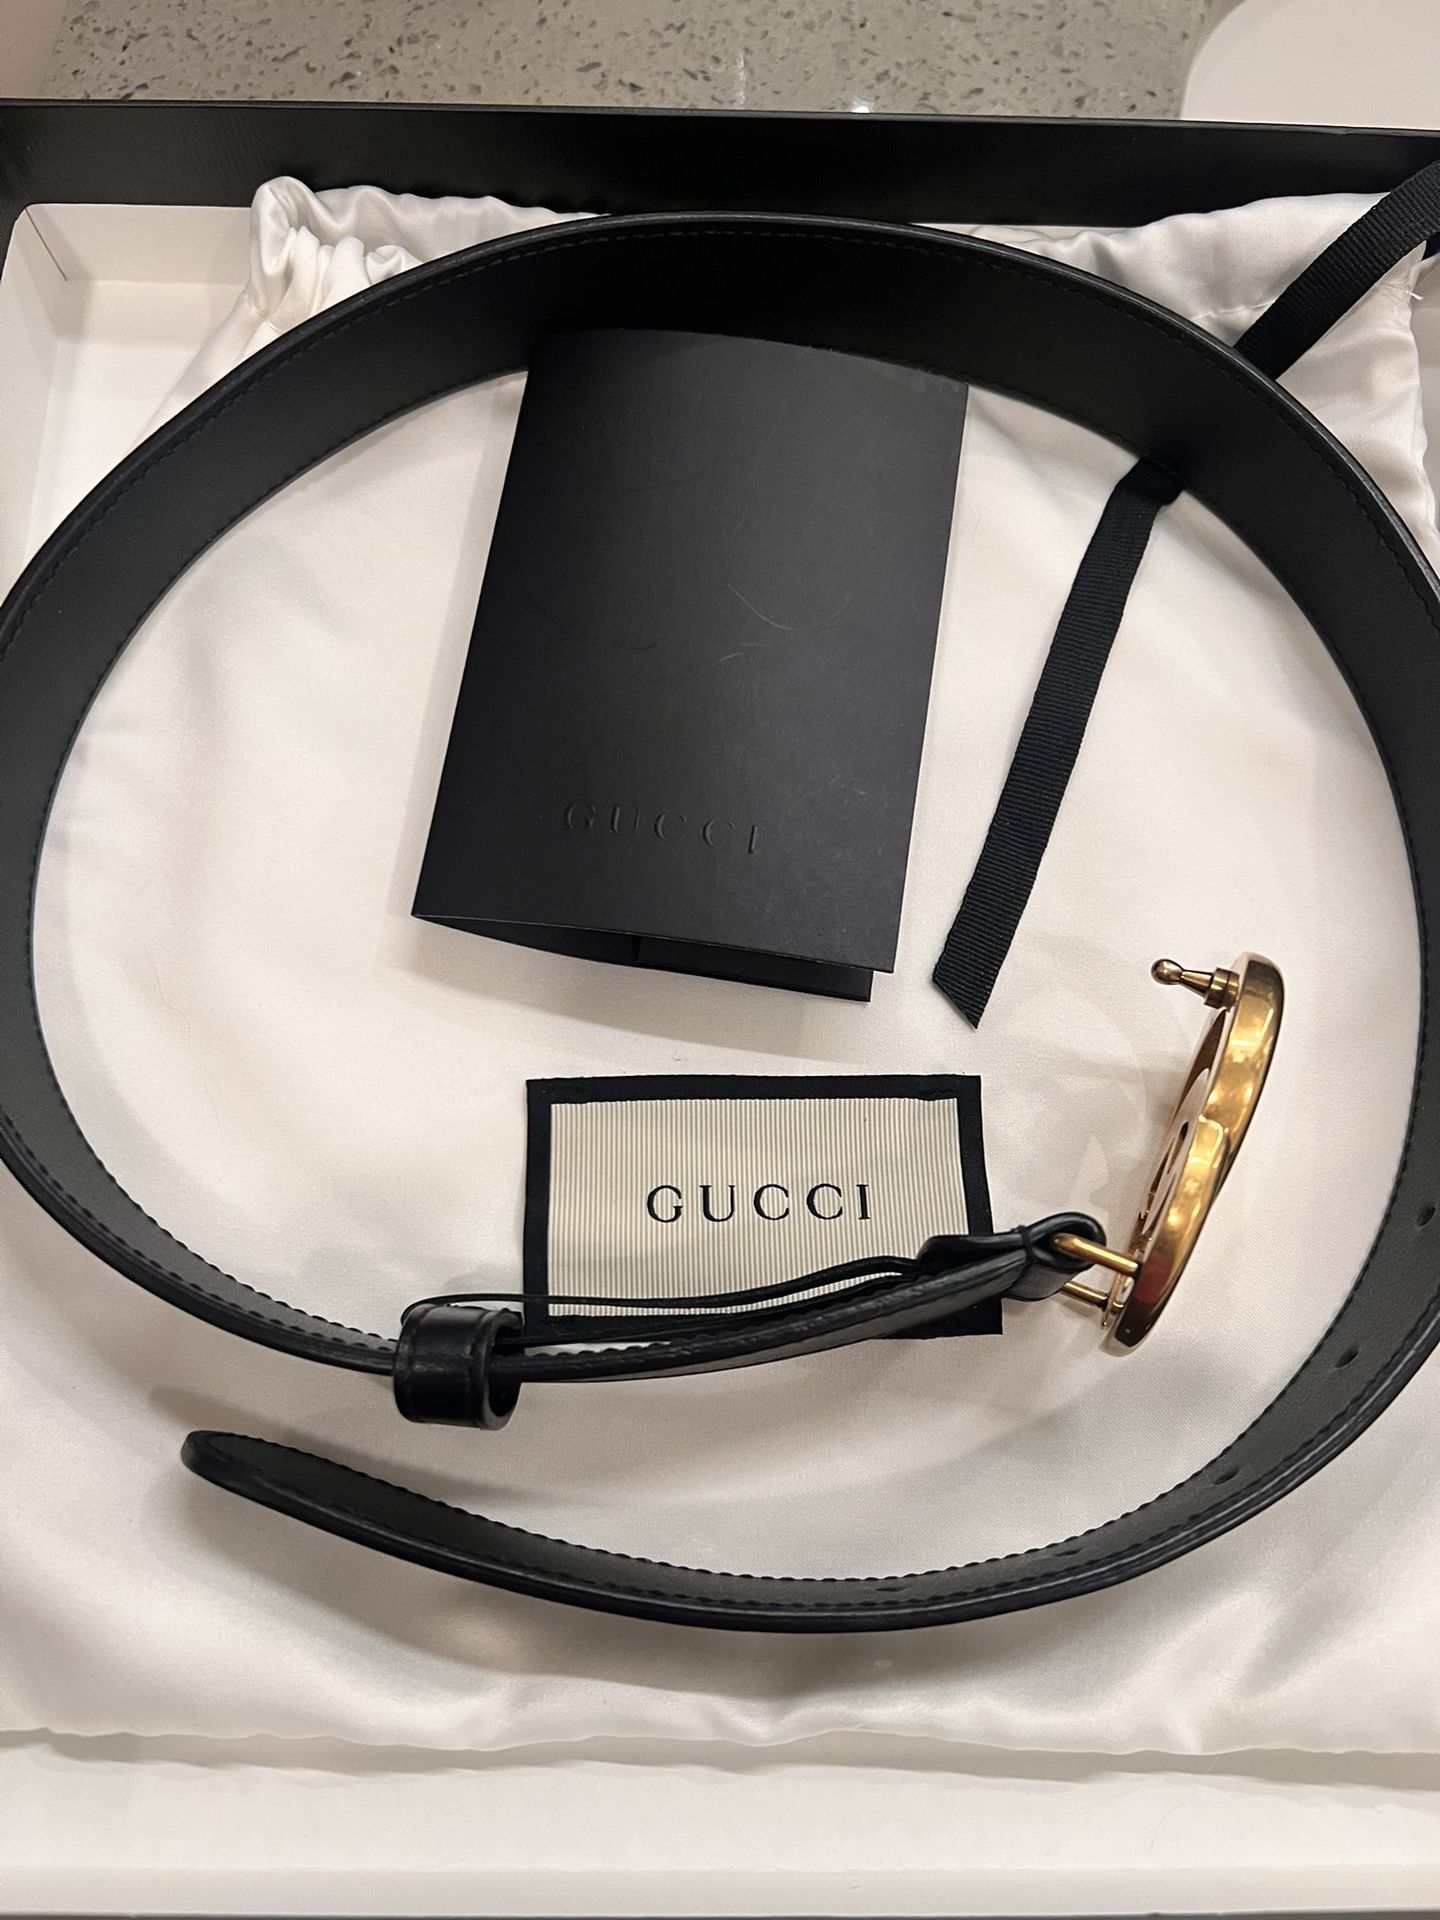 Men’s Gucci belt For Sale - Comes With Receipt, Box And Dust Bag 